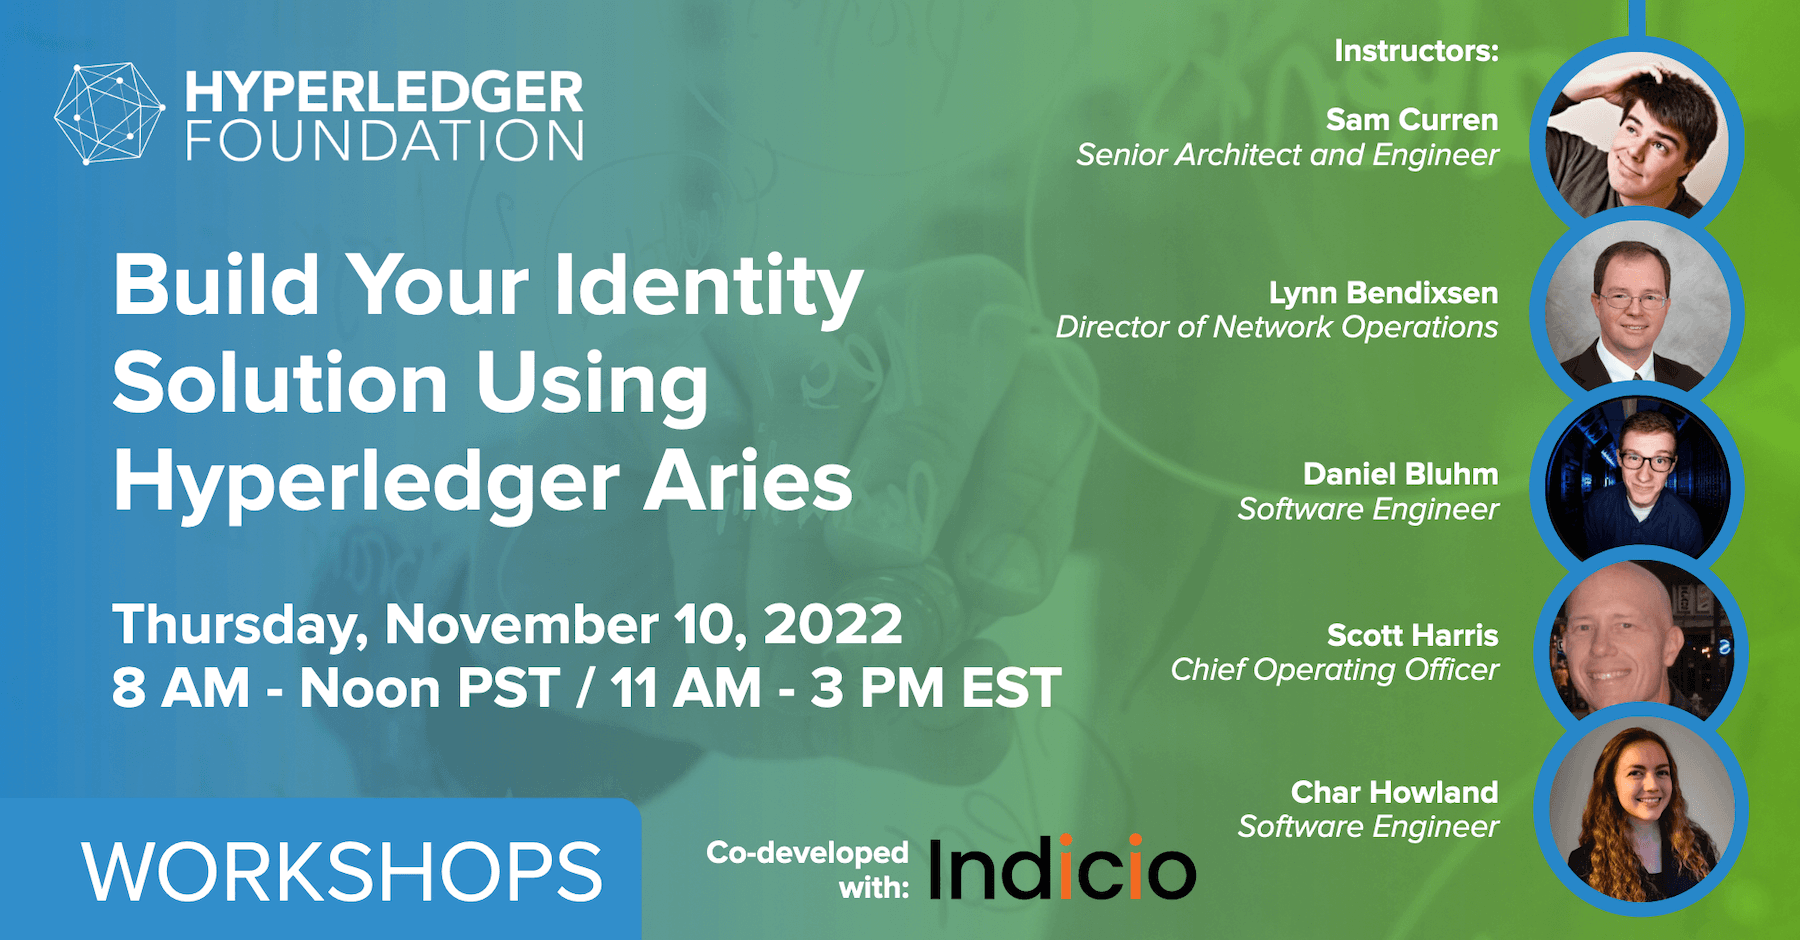 FREE WORKSHOP: Build Your Identity Solution Using Hyperledger Aries